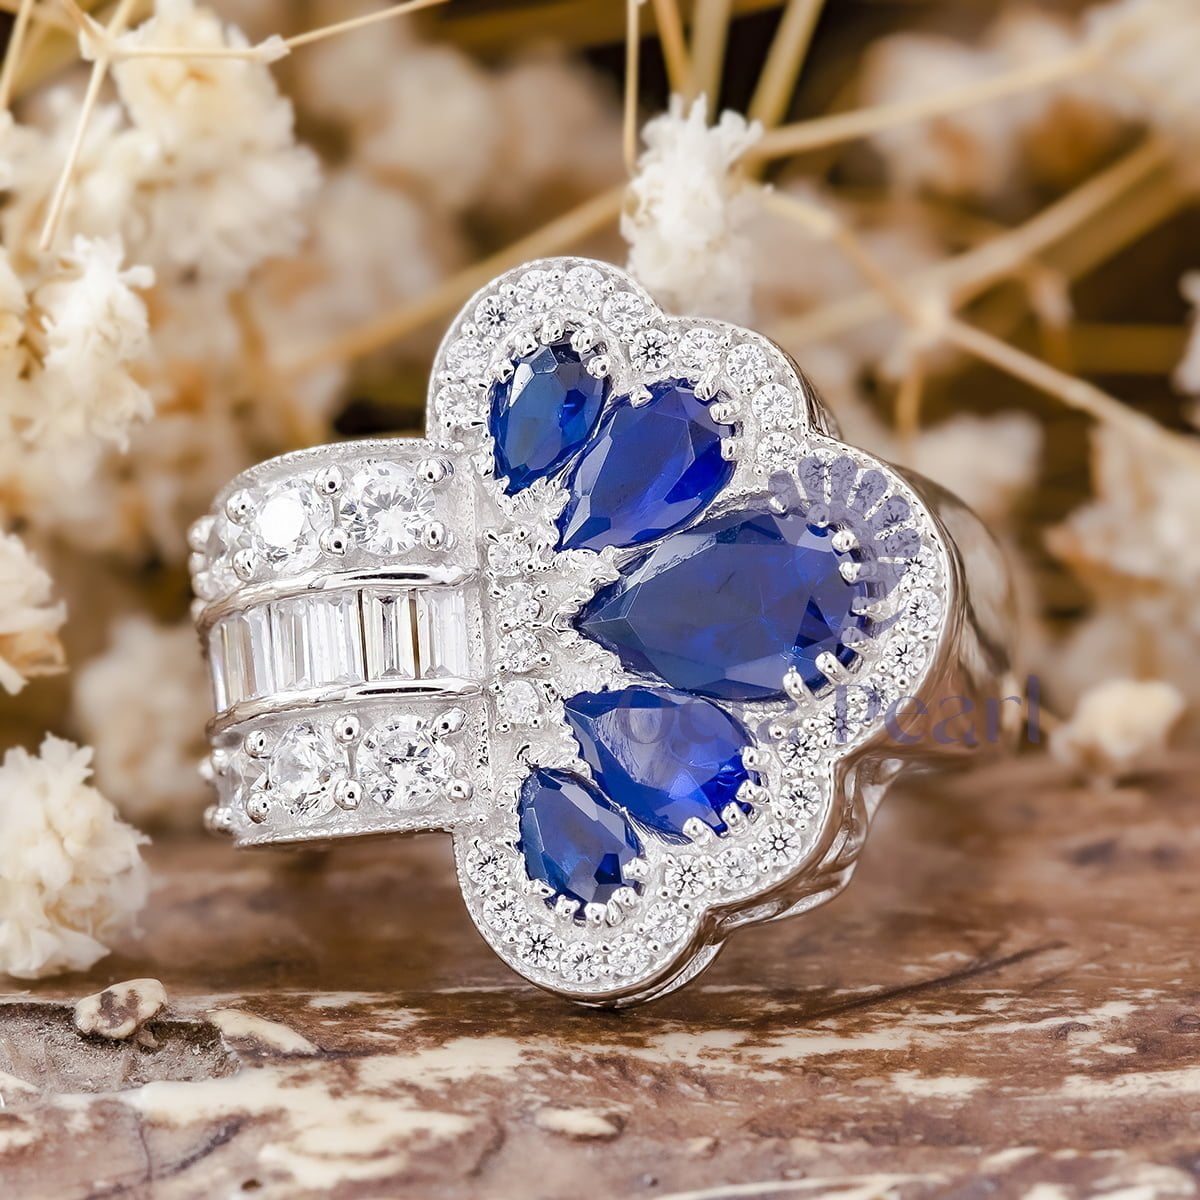 Blue Sapphire Victorian Peacock Feather Ring in Pear Cut CZ Stone